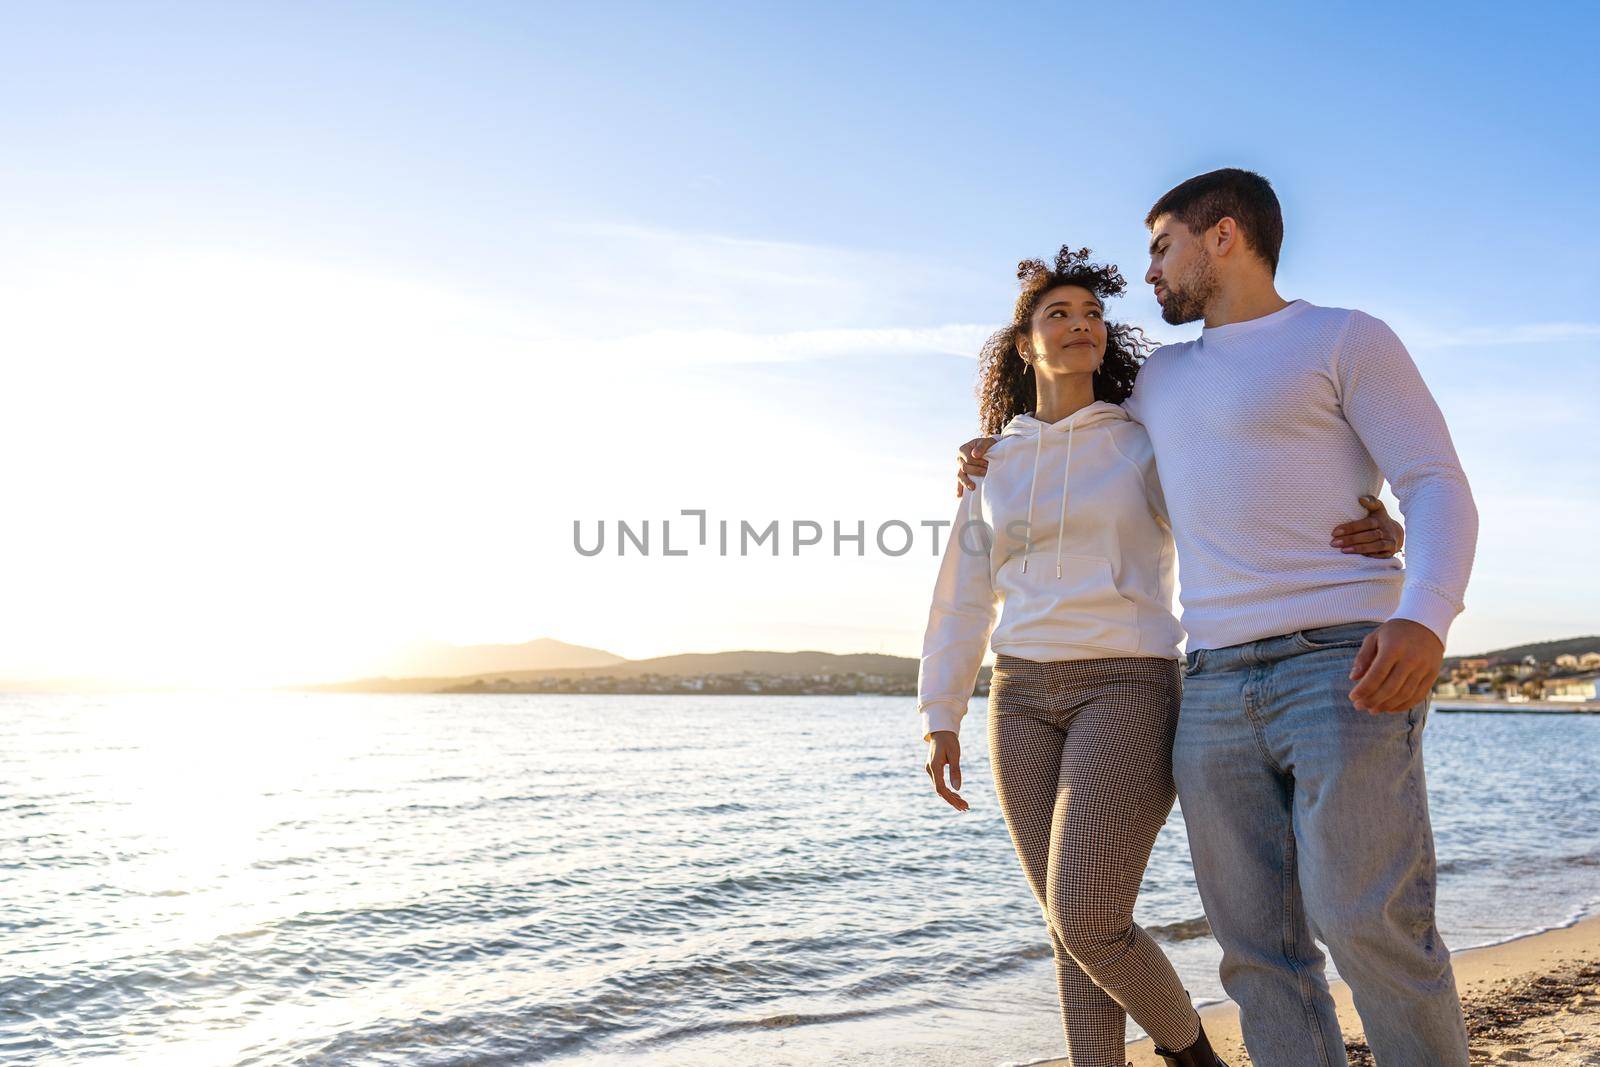 Multiracial couple of young millennials in love embracing each other while walking by the sea at sunset or sunrise looking into each other's eyes. Concept: affections has no boundaries of race or sex by robbyfontanesi